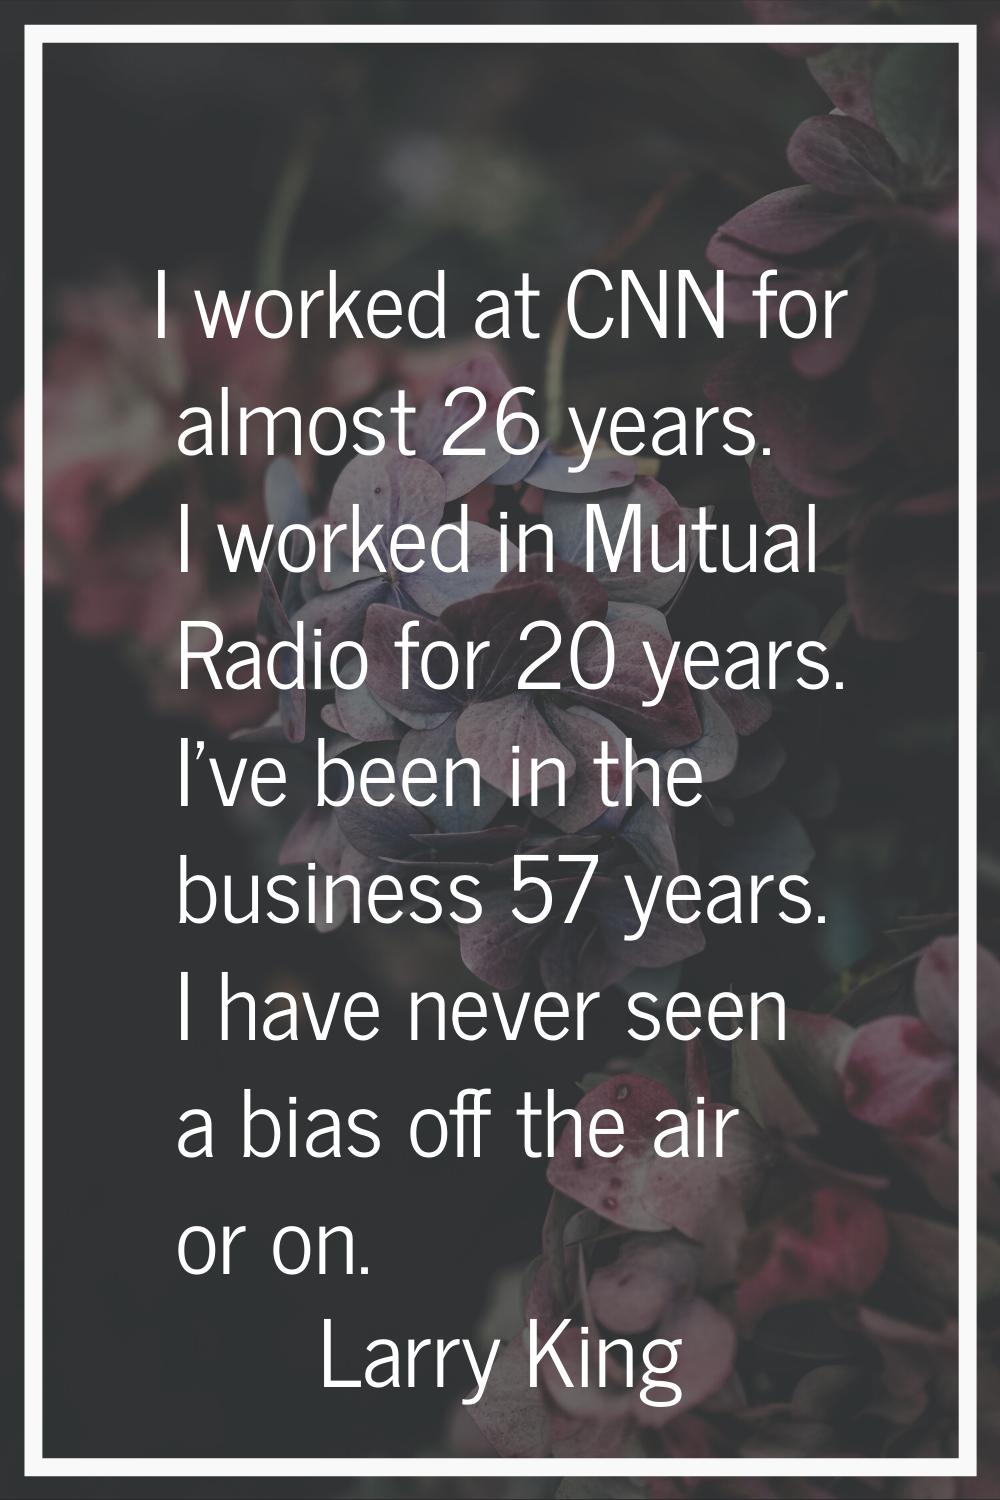 I worked at CNN for almost 26 years. I worked in Mutual Radio for 20 years. I've been in the busine